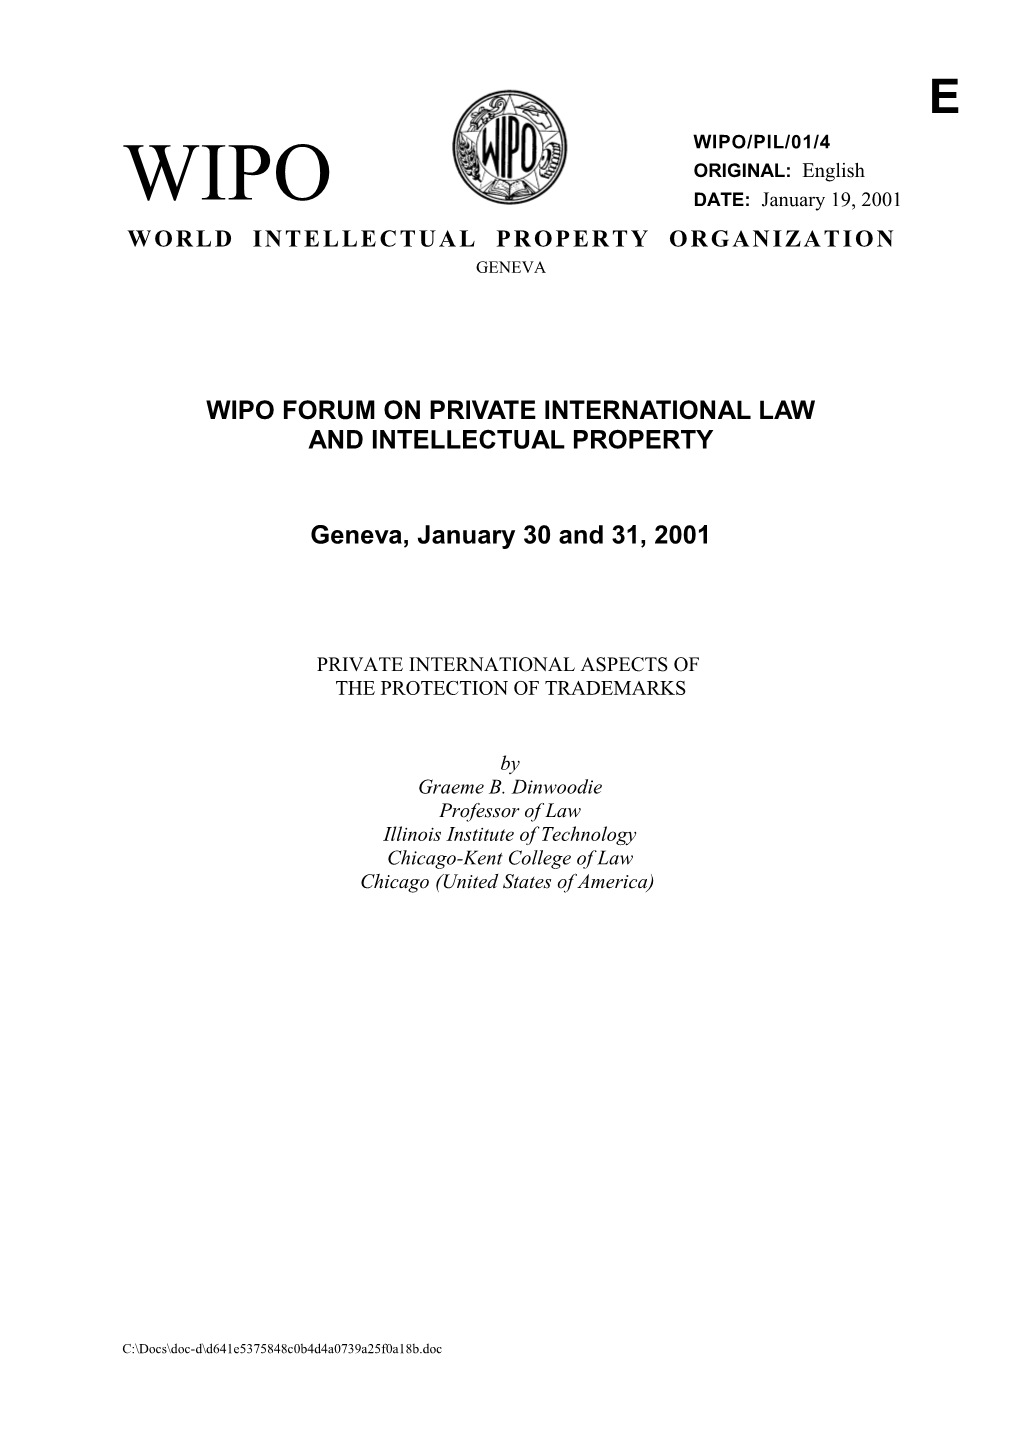 WIPO/PIL/01/4: Private International Aspects of the Protection of Trademarks